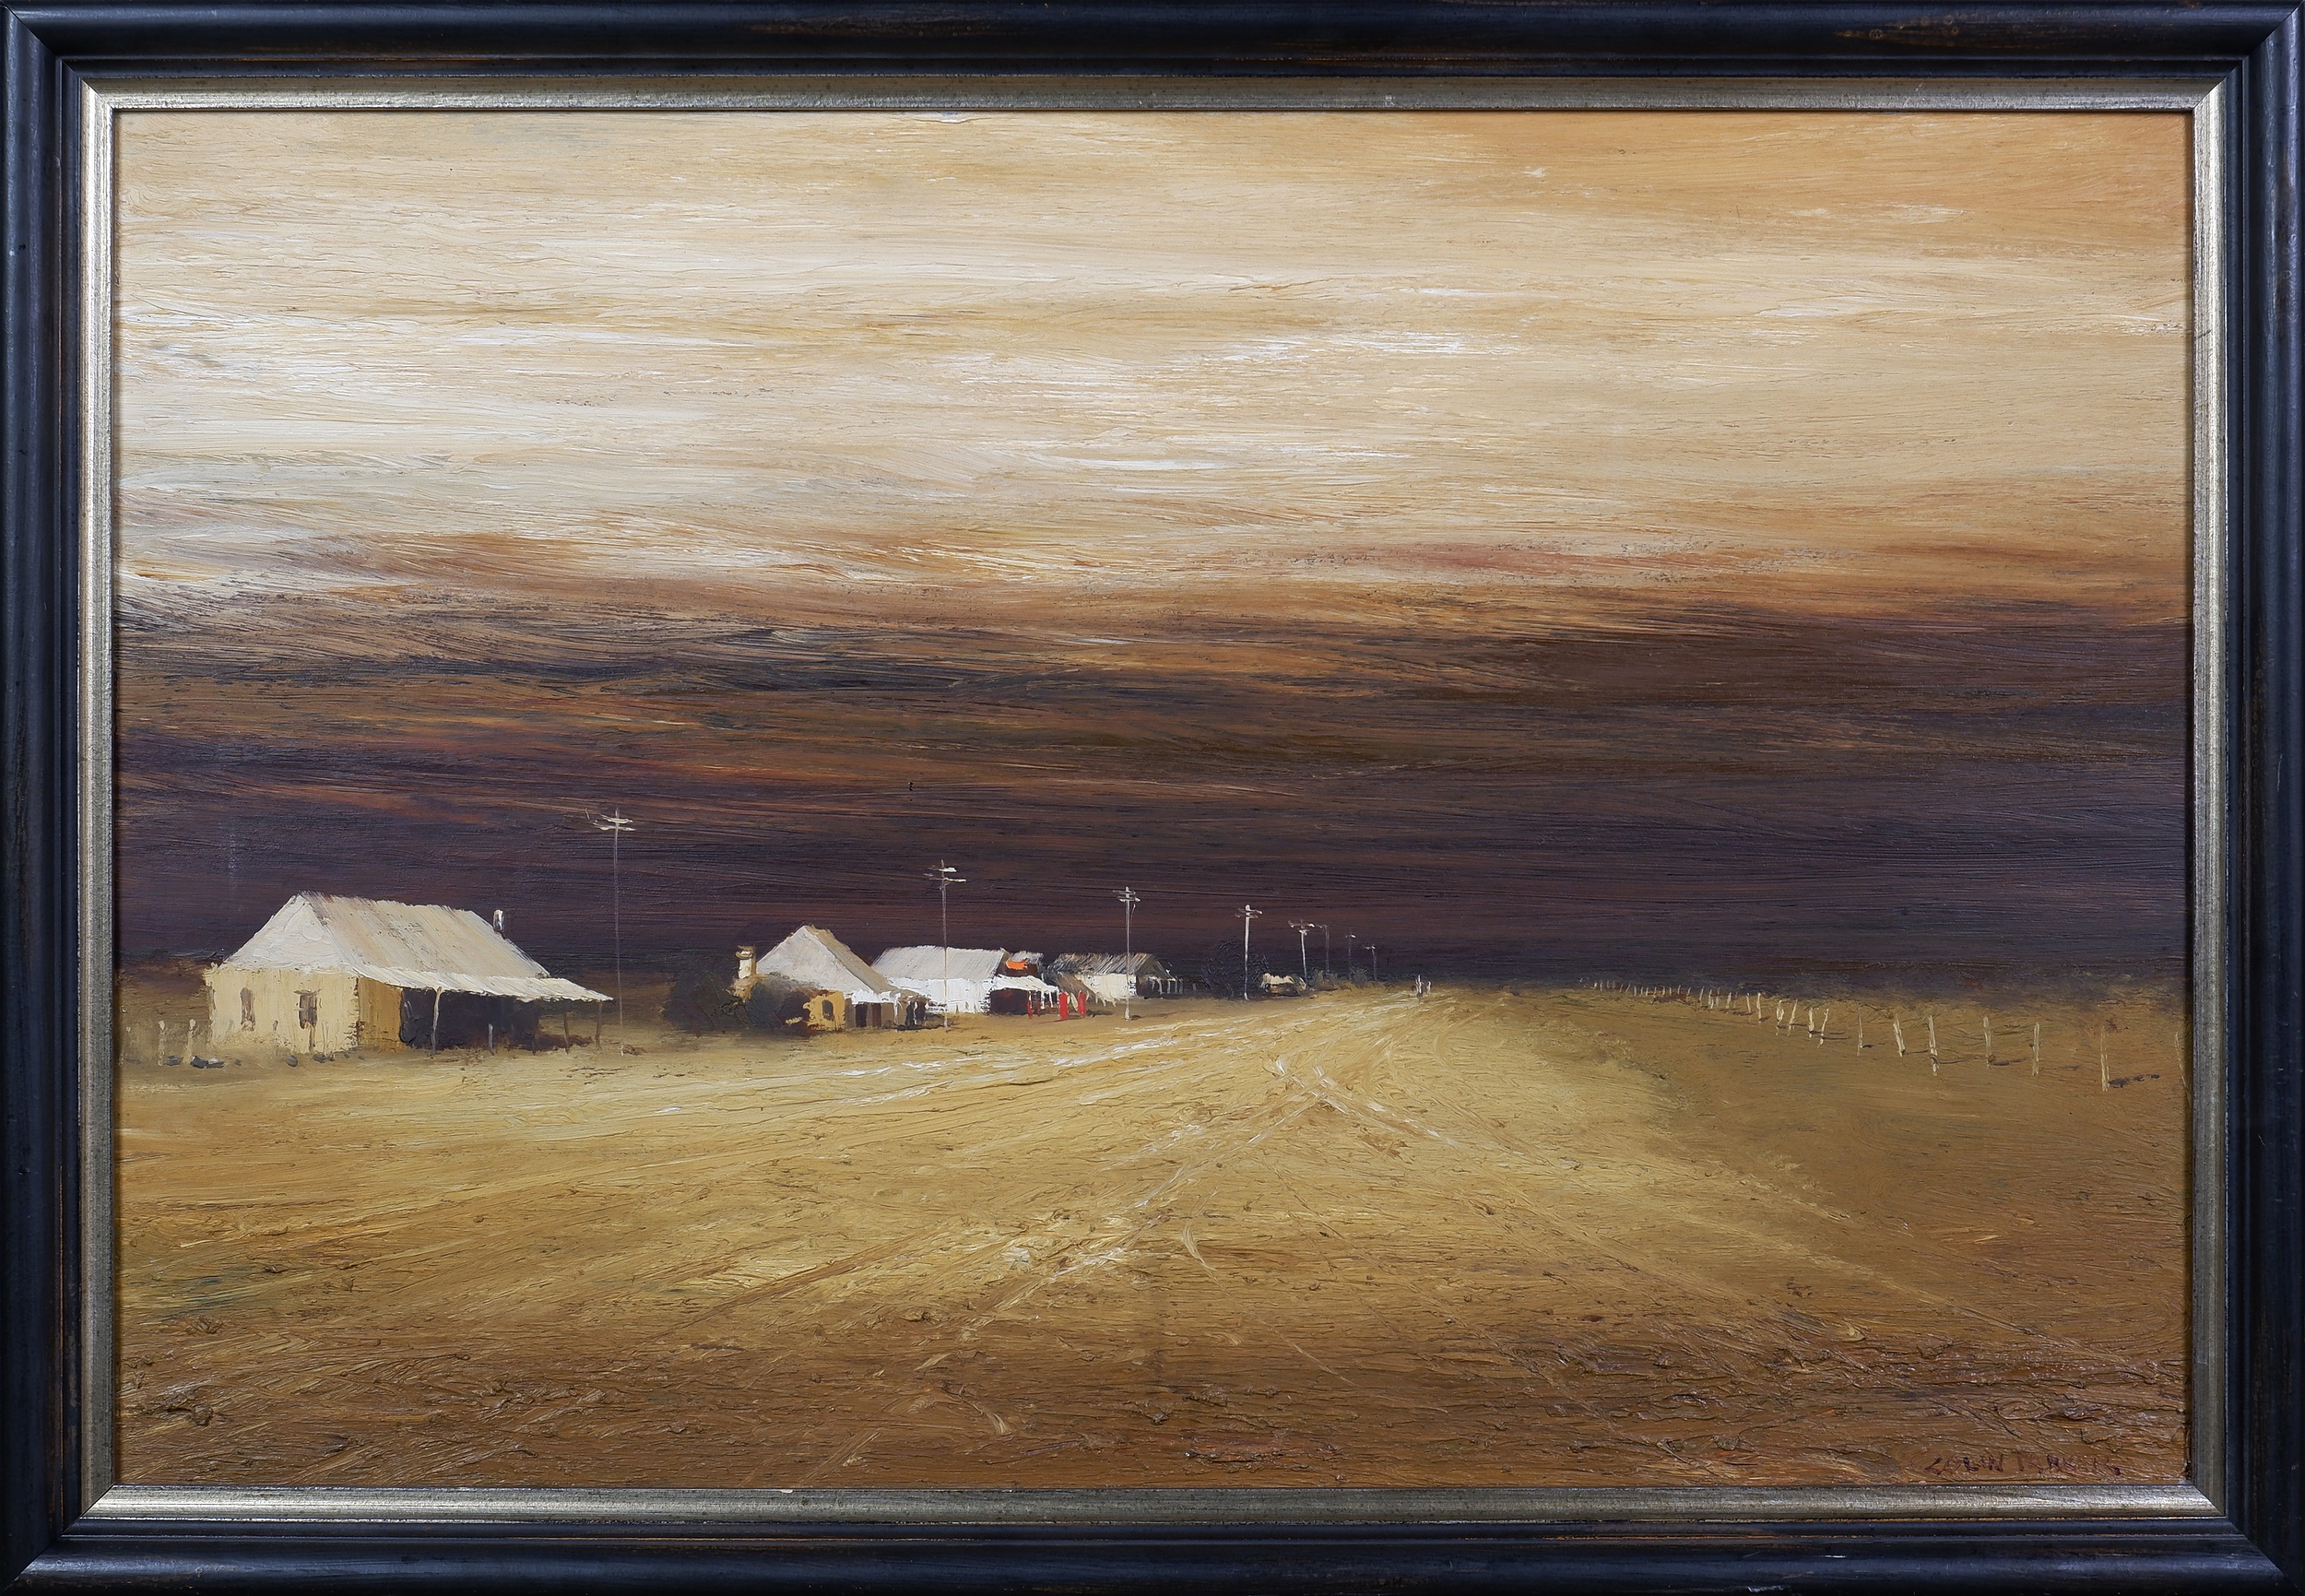 'Colin Parker (born 1941), At Girilambone New South Wales 1974, Oil on Board'